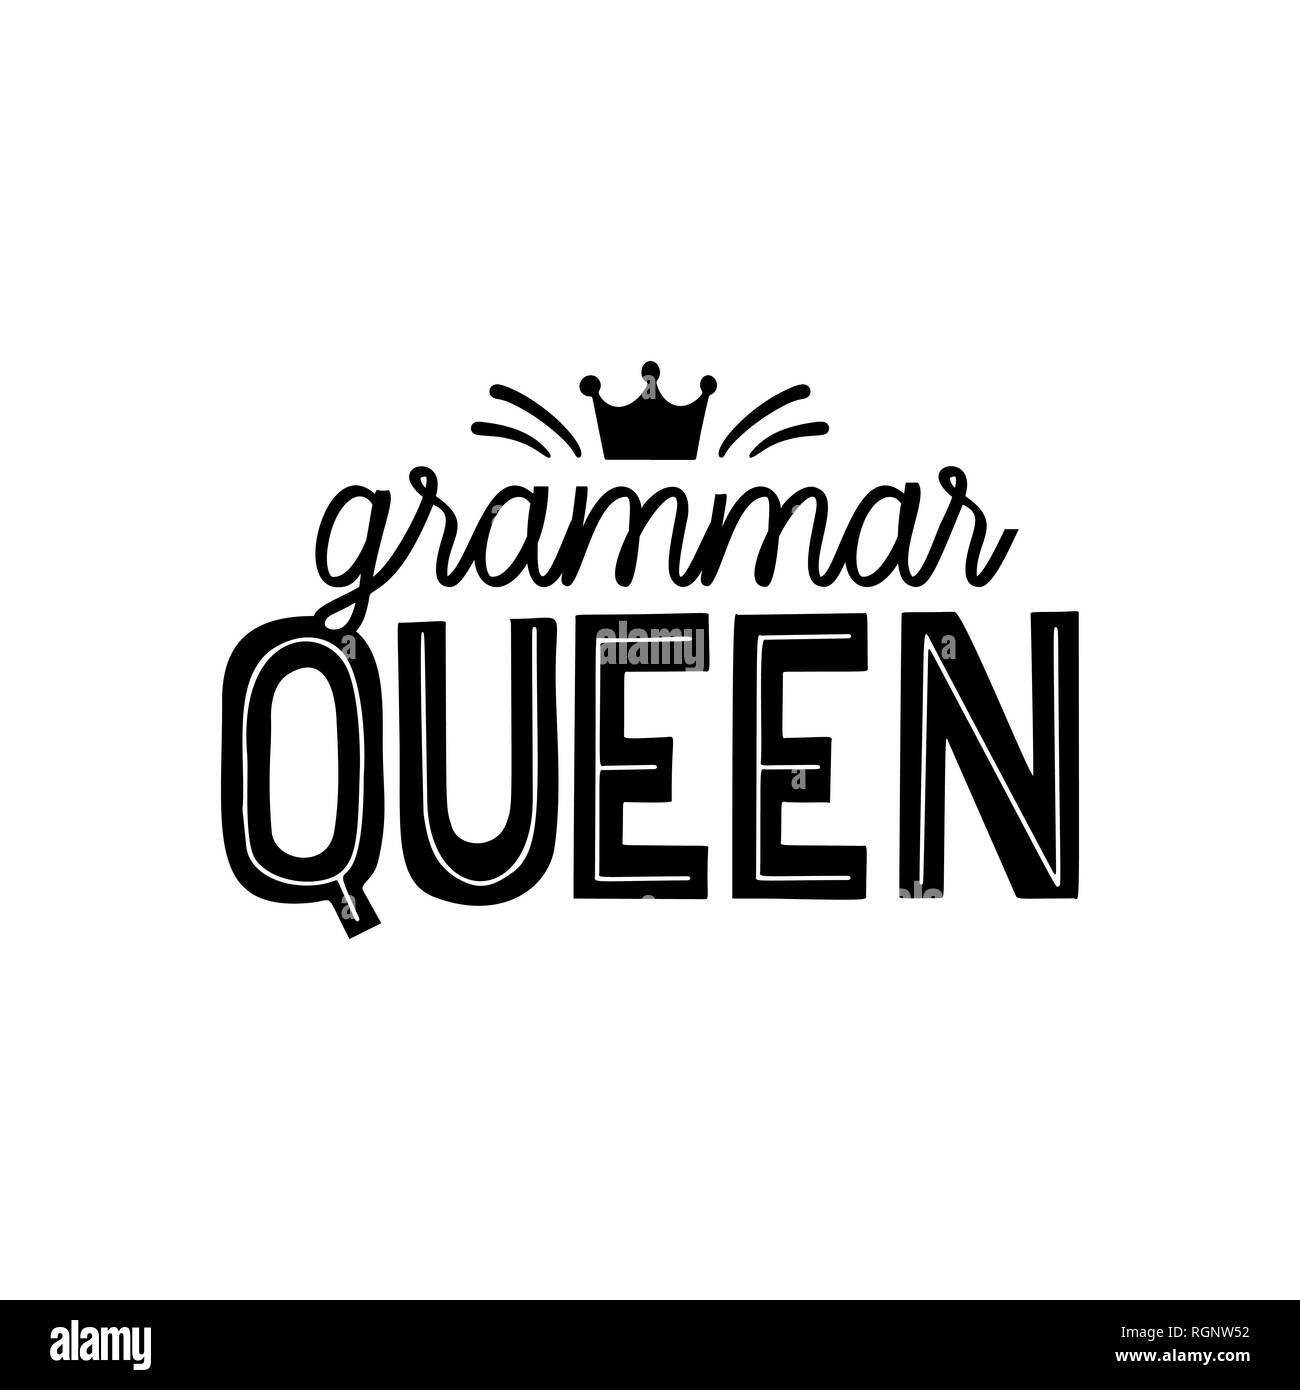 Grammar nazi hand lettring quote. Grammar queen vector print for printing on t-shirt, labels, mugs and all gifts. Stock Vector